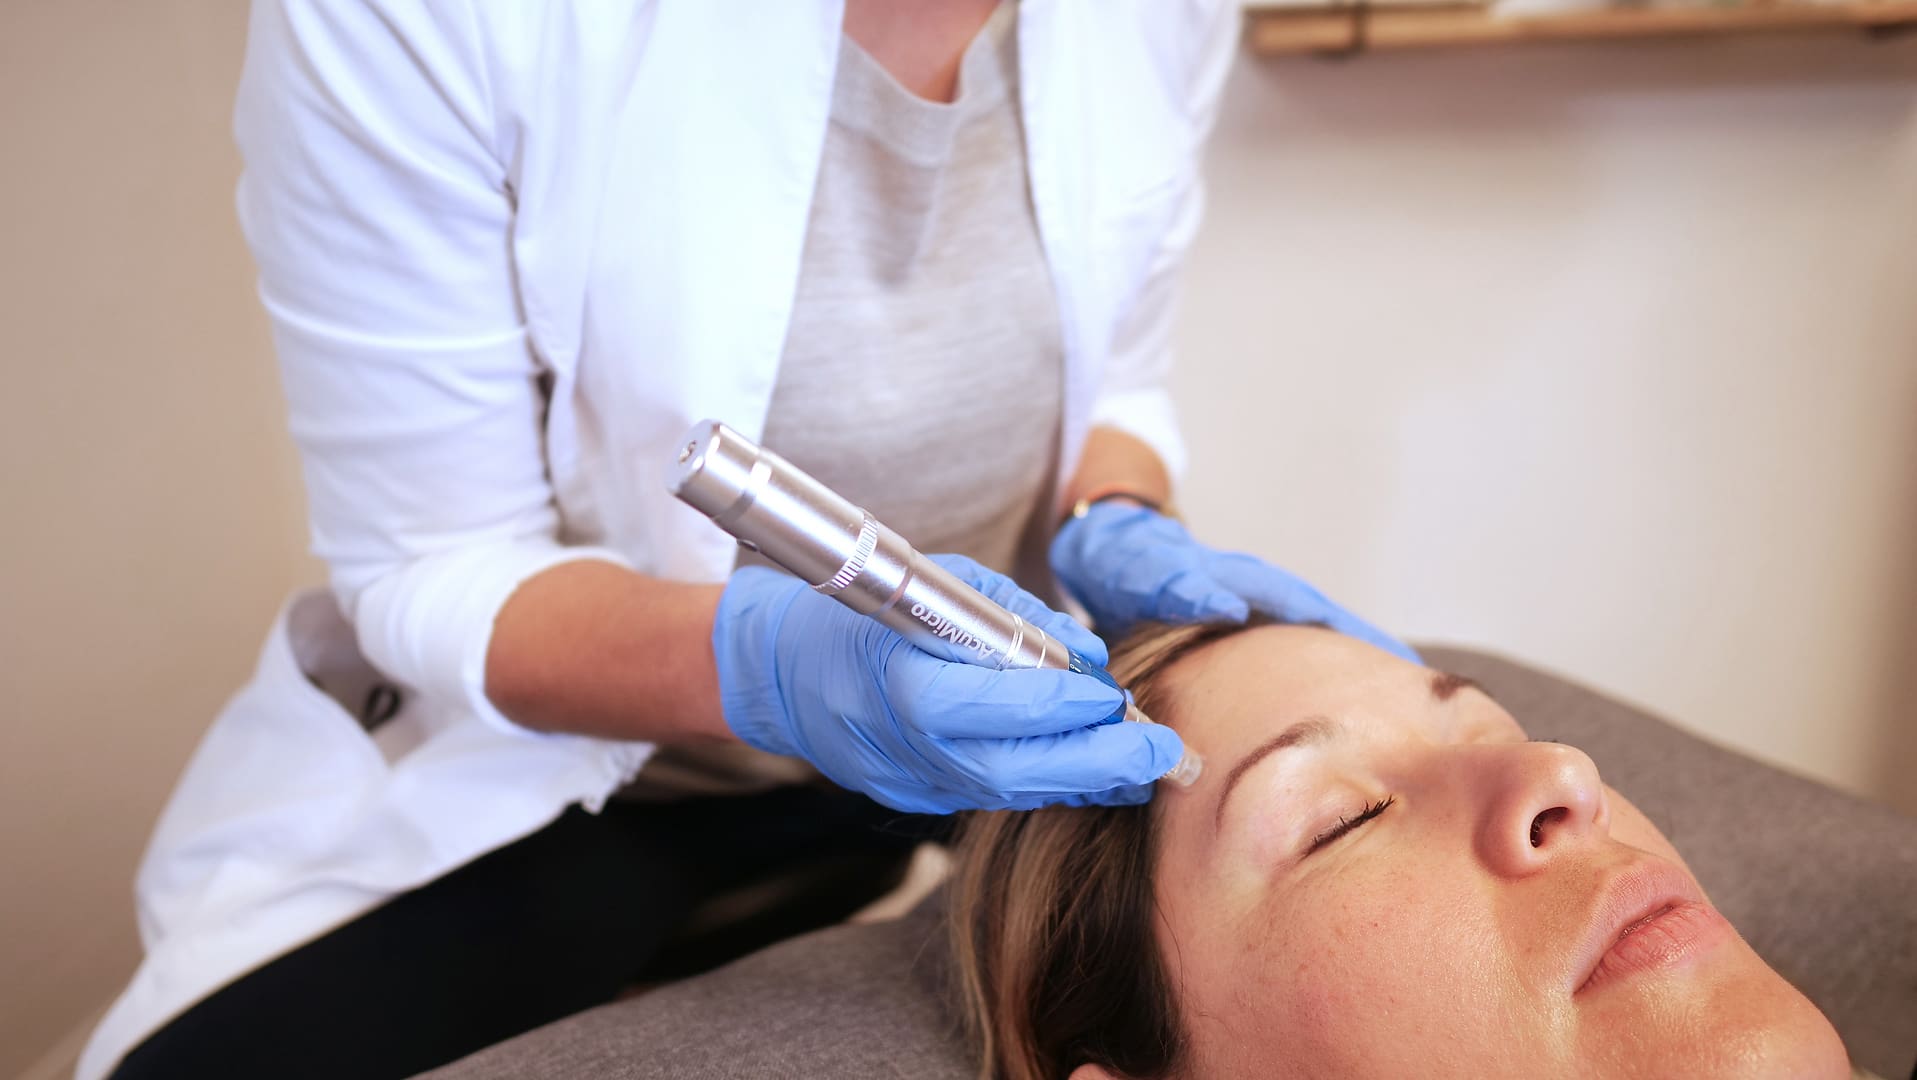 A woman getting her face microdermabrasion procedure done.